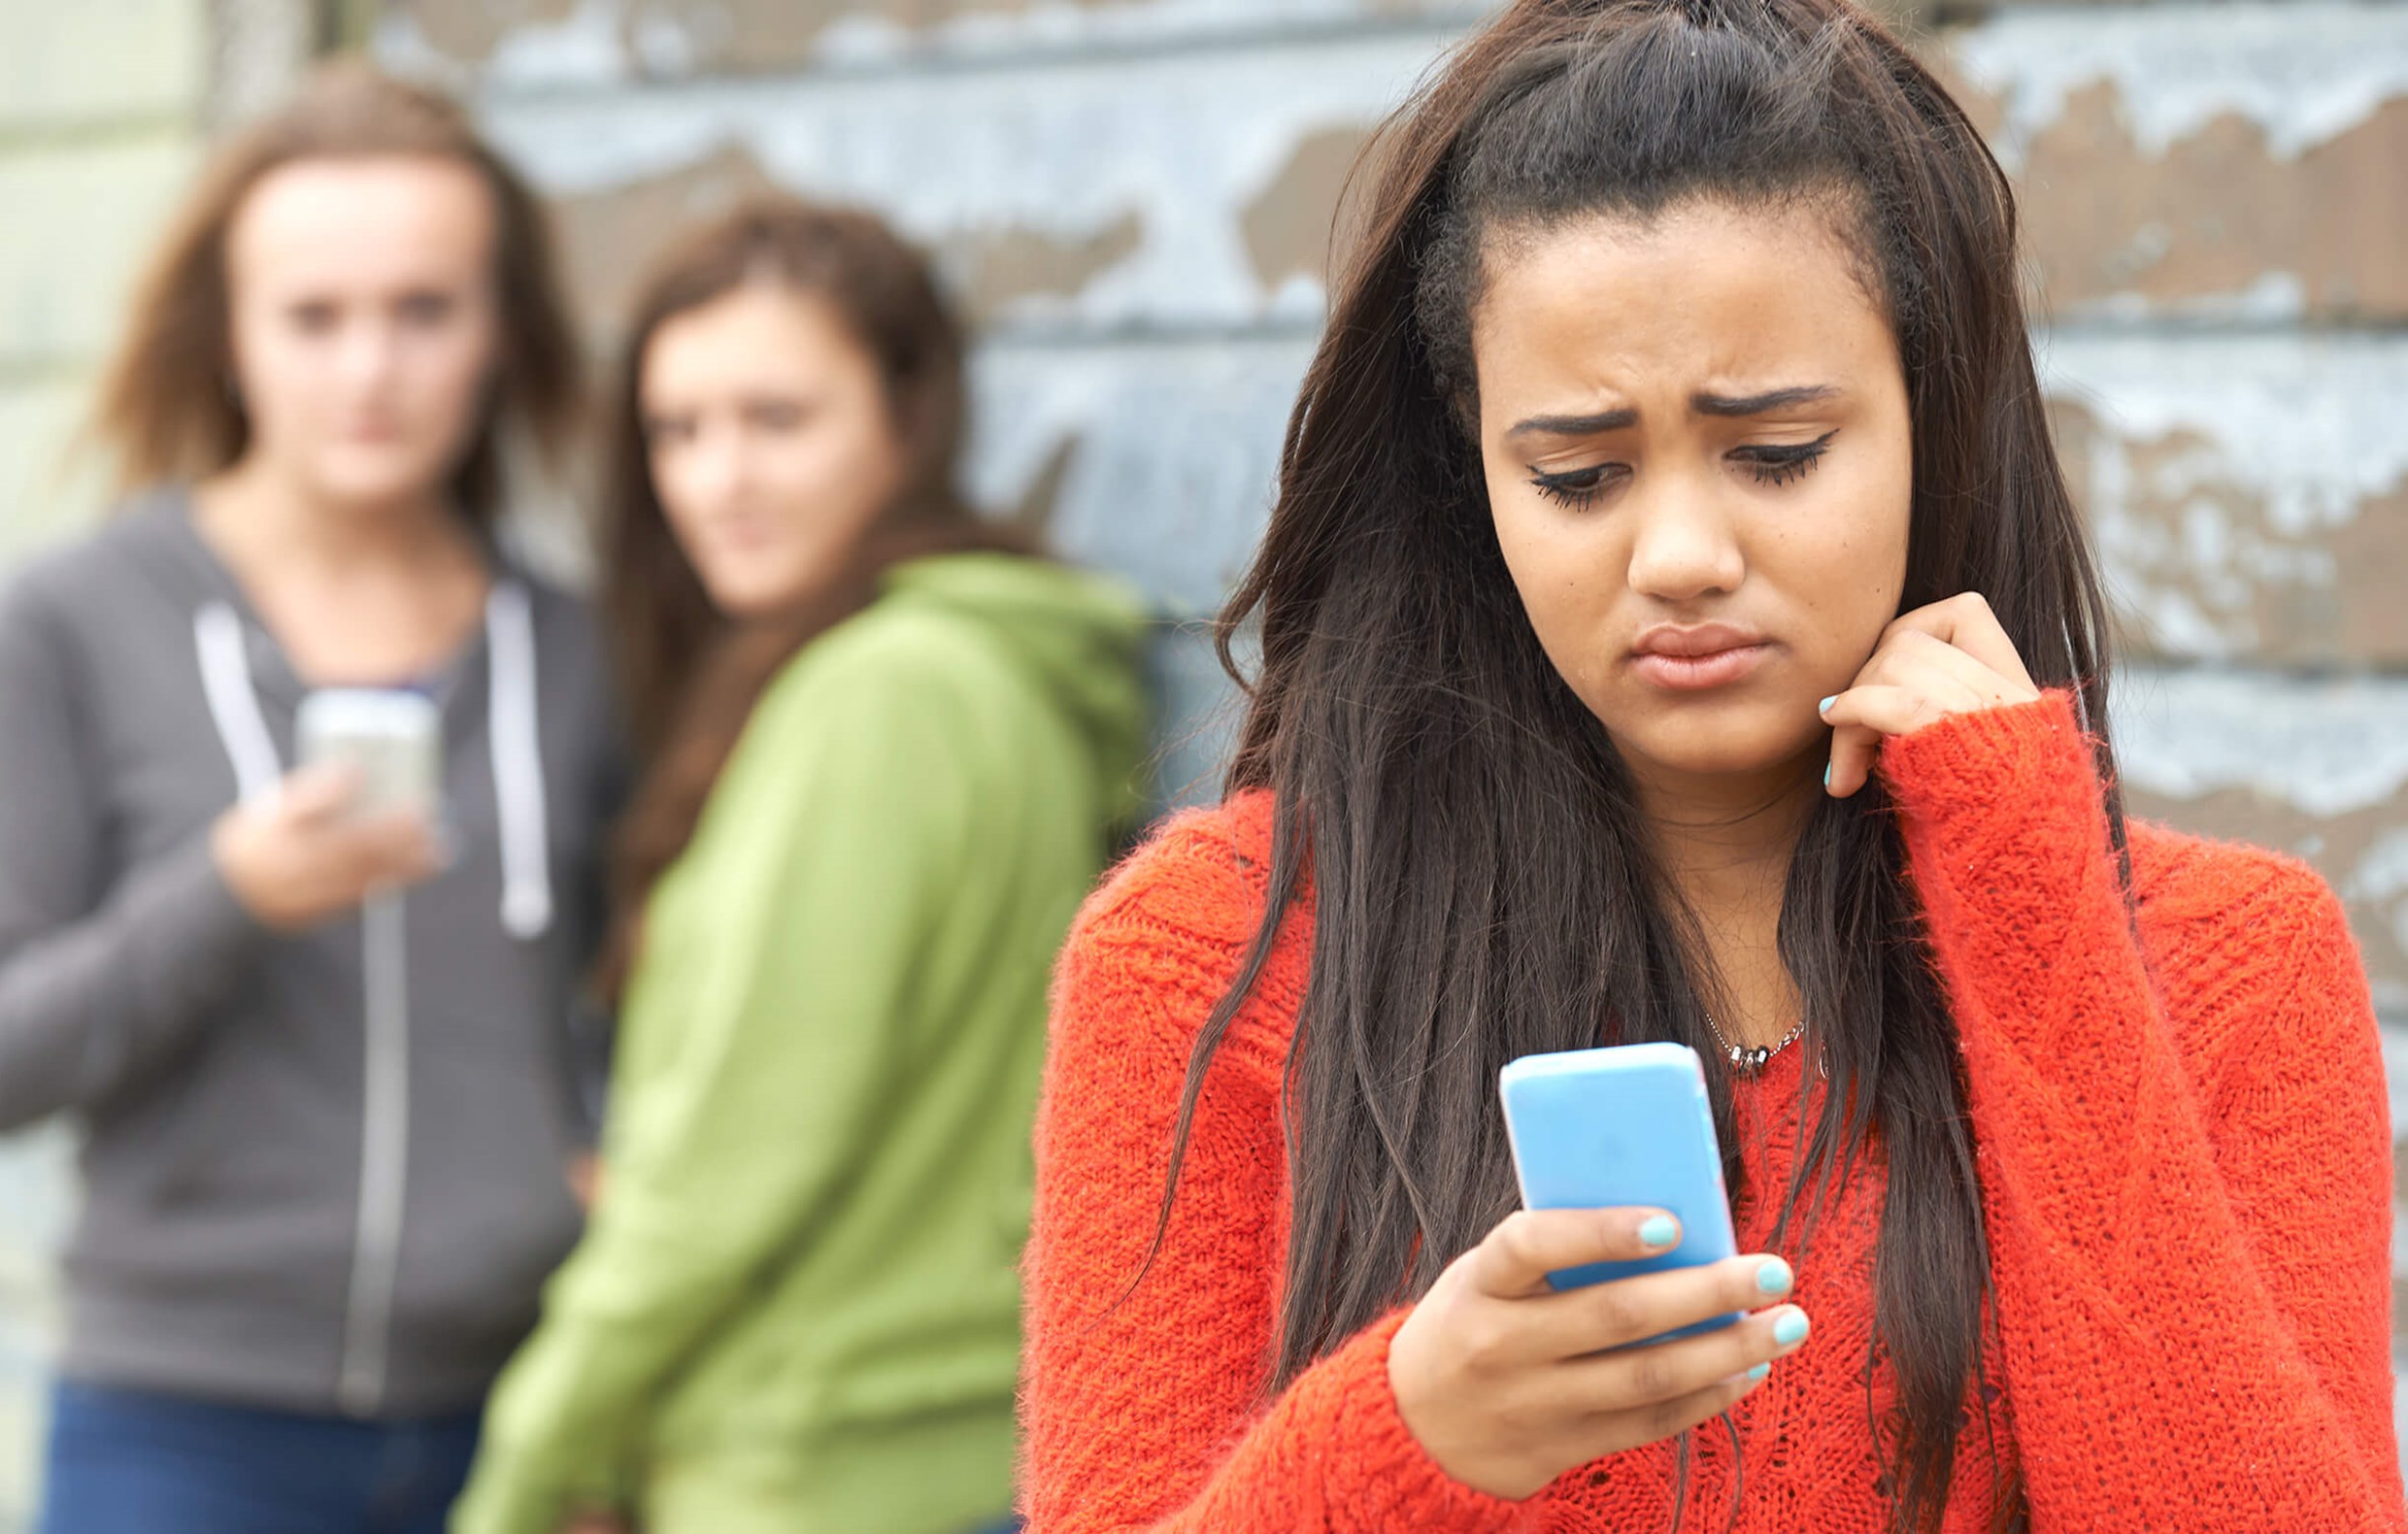 Research Explores Social Media Risks Of Cyberbullying Unhealthy Eating For Youth Camh